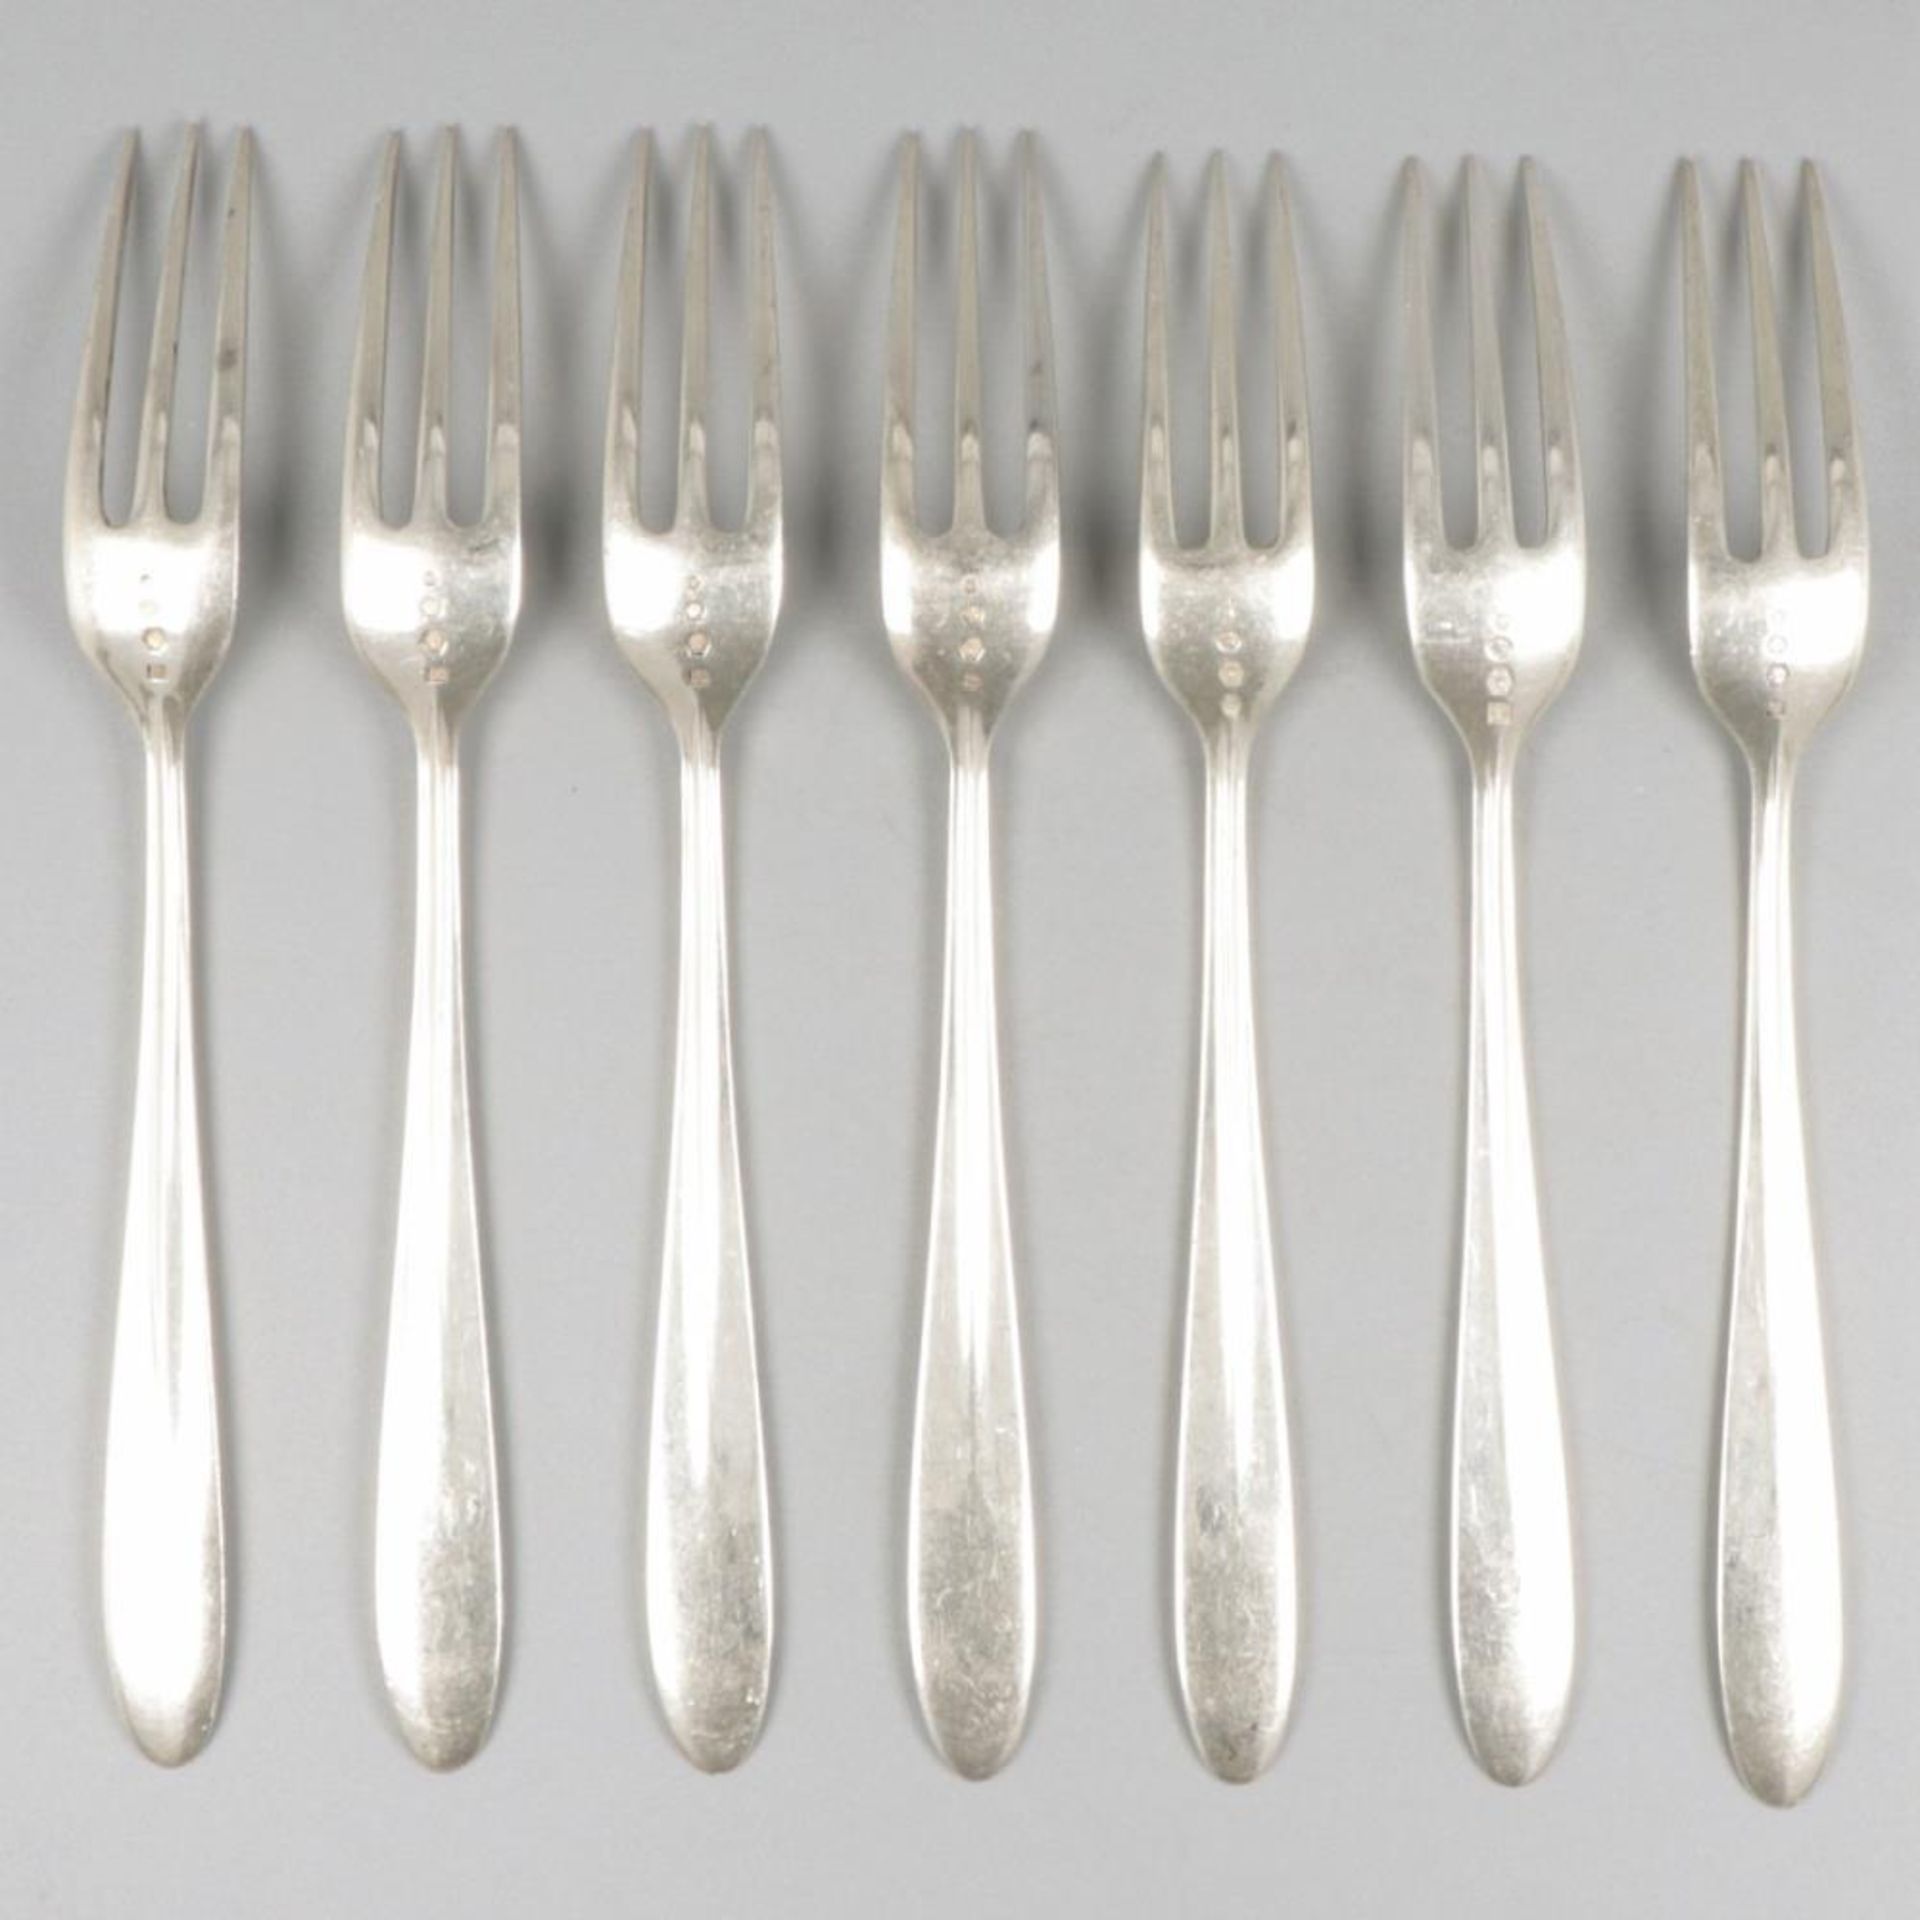 6-piece set of forks silver. - Image 2 of 6